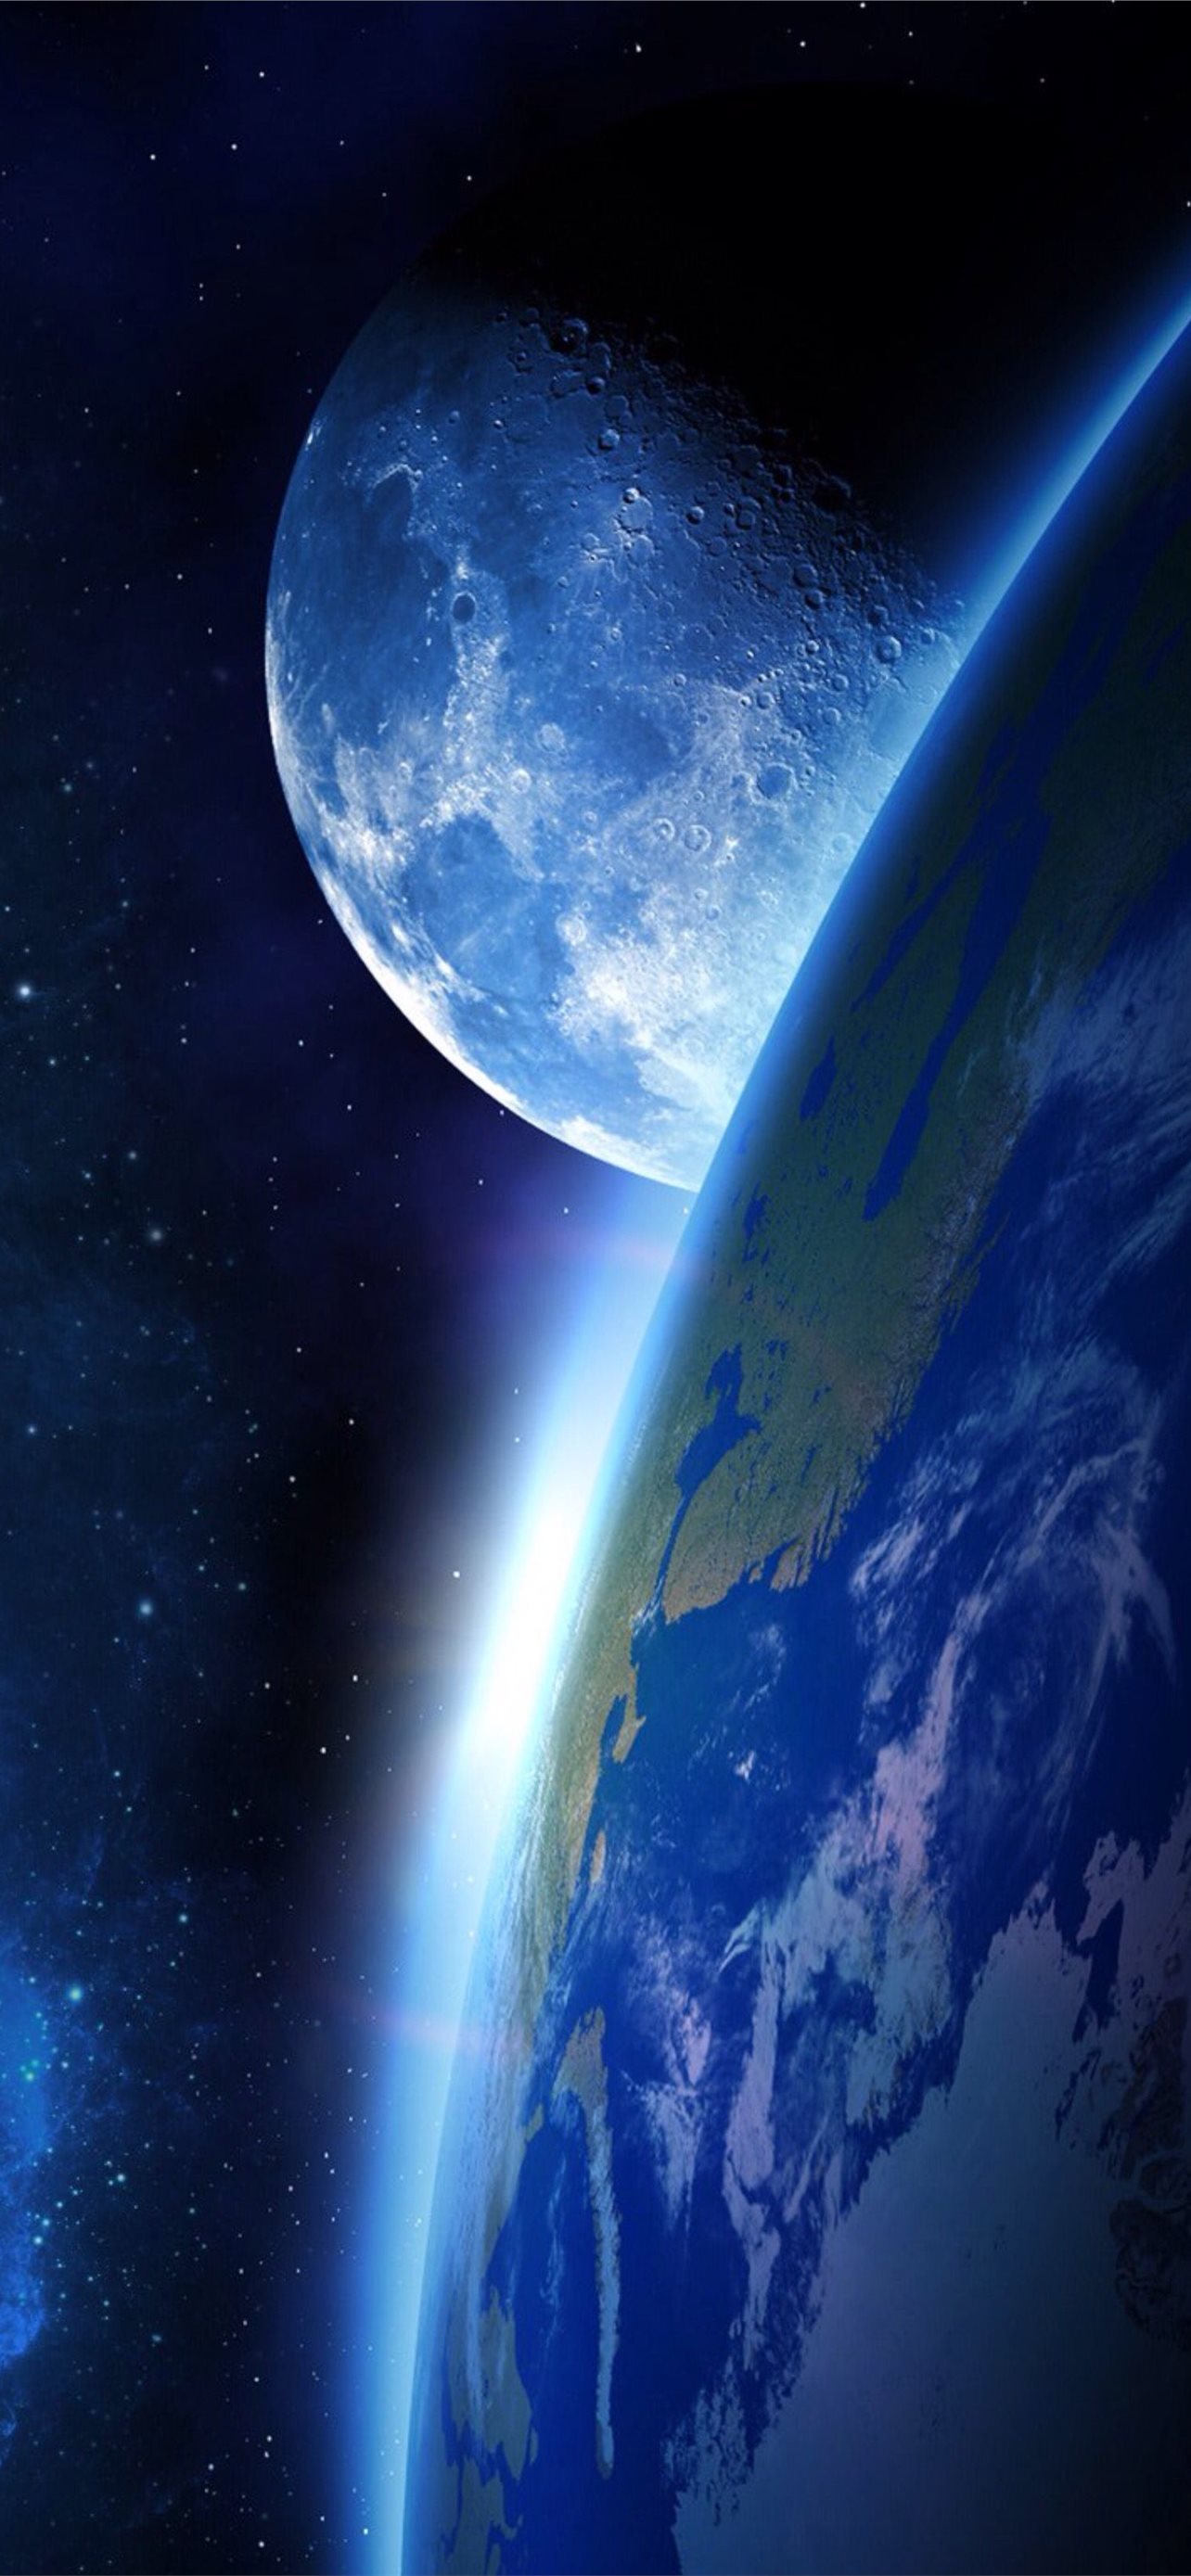 earth from space iPhone Wallpaper Free Download